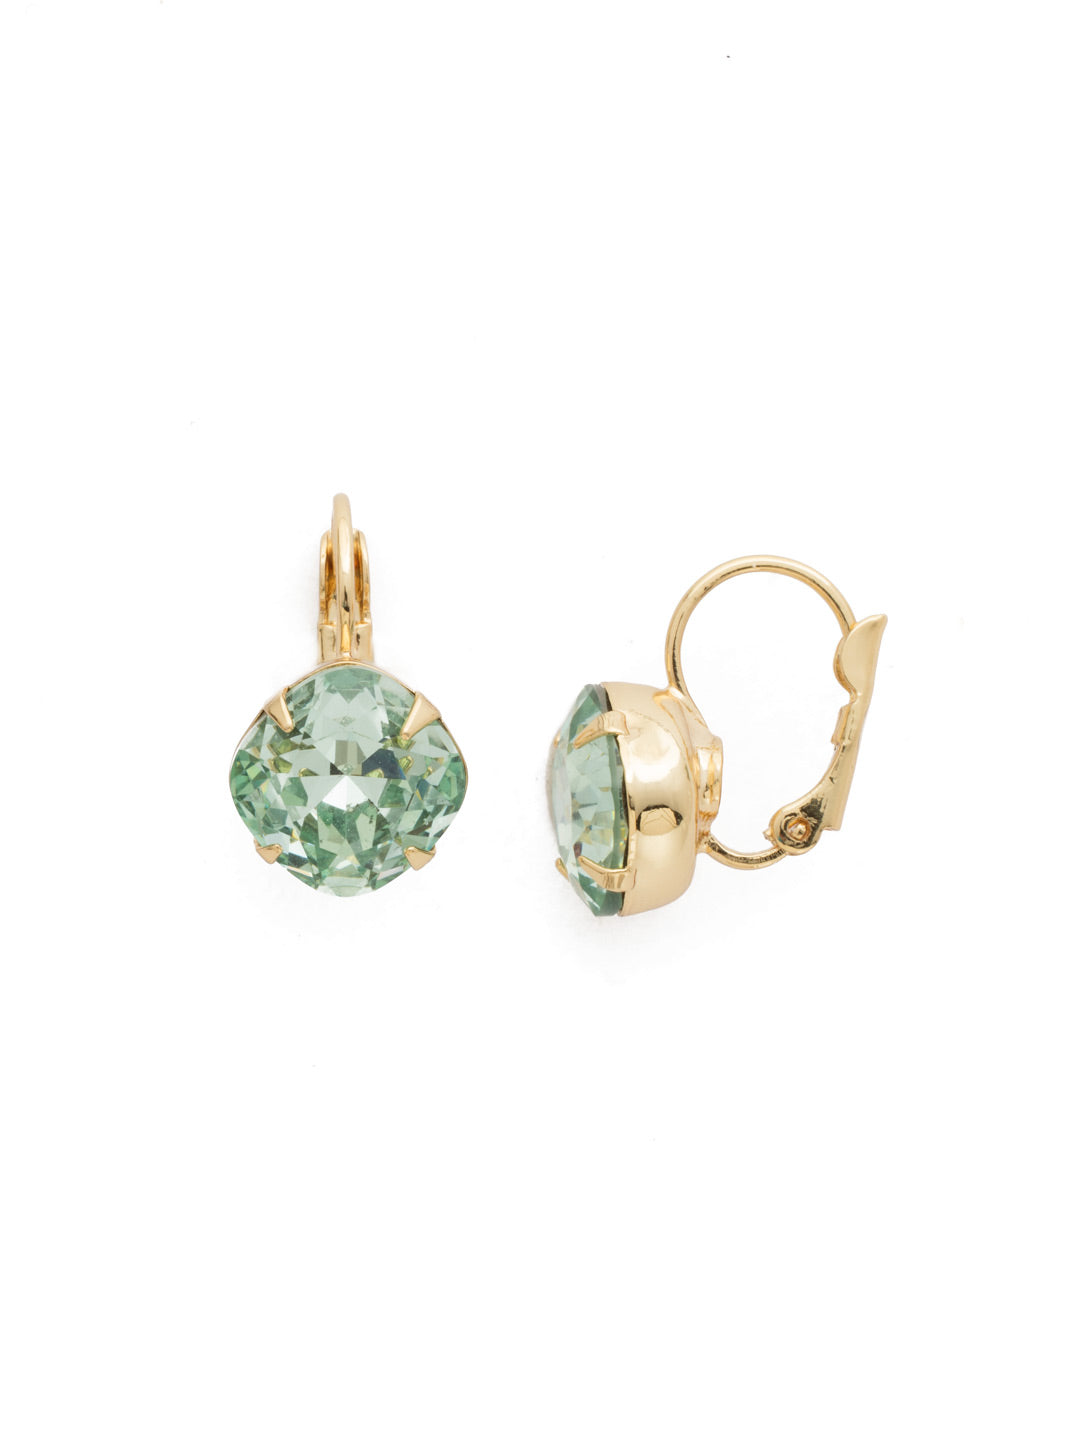 Cushion-Cut Dangle Earrings - EDL12BGMIN - A simple, yet stunning earring featuring a cushion cut crystal that will never go out of style. From Sorrelli's Mint collection in our Bright Gold-tone finish.